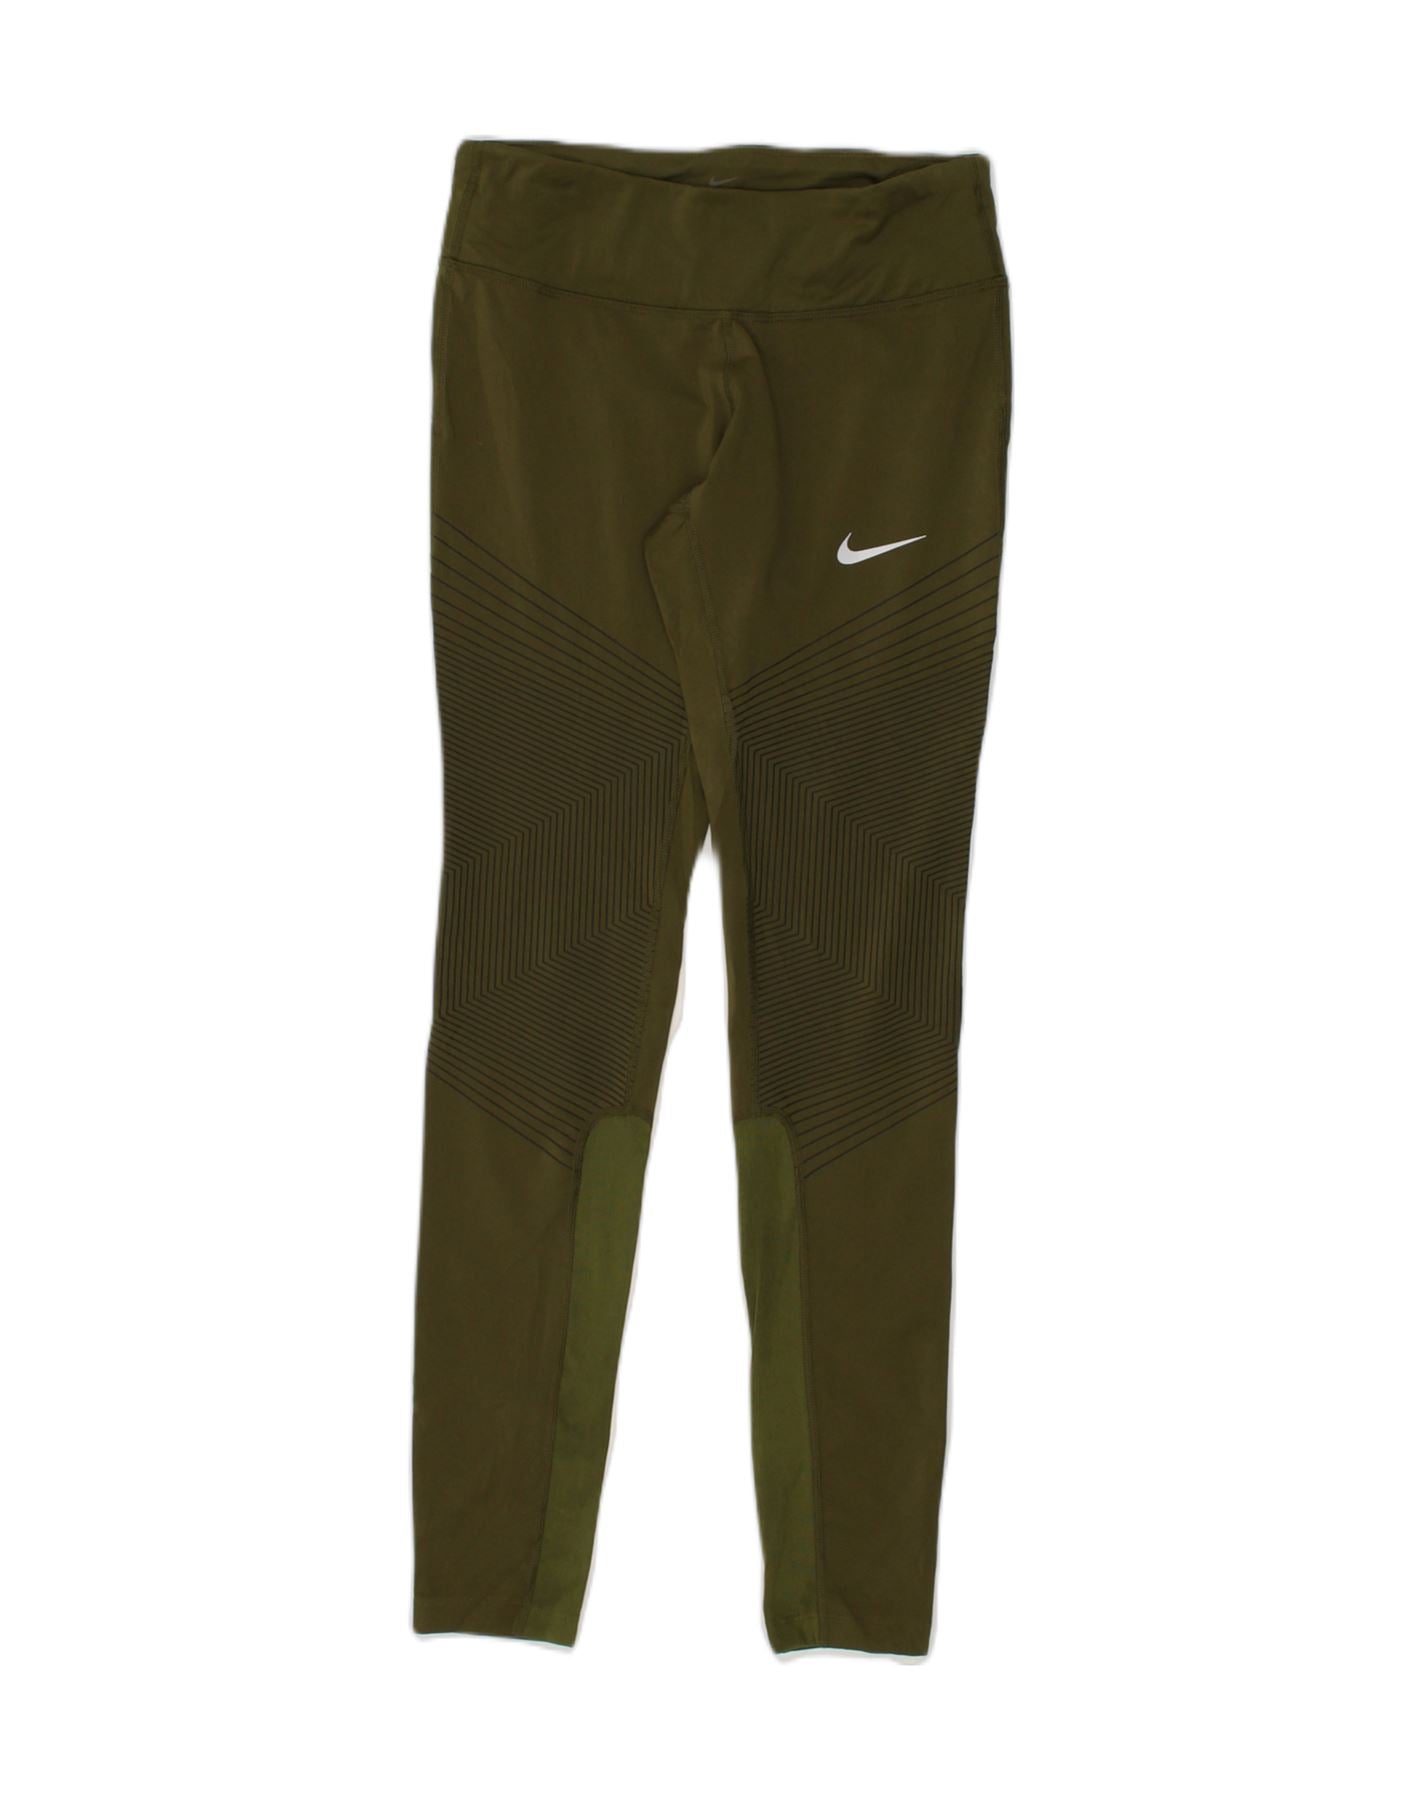 NIKE Womens Leggings XS Green Polyester, Vintage & Second-Hand Clothing  Online